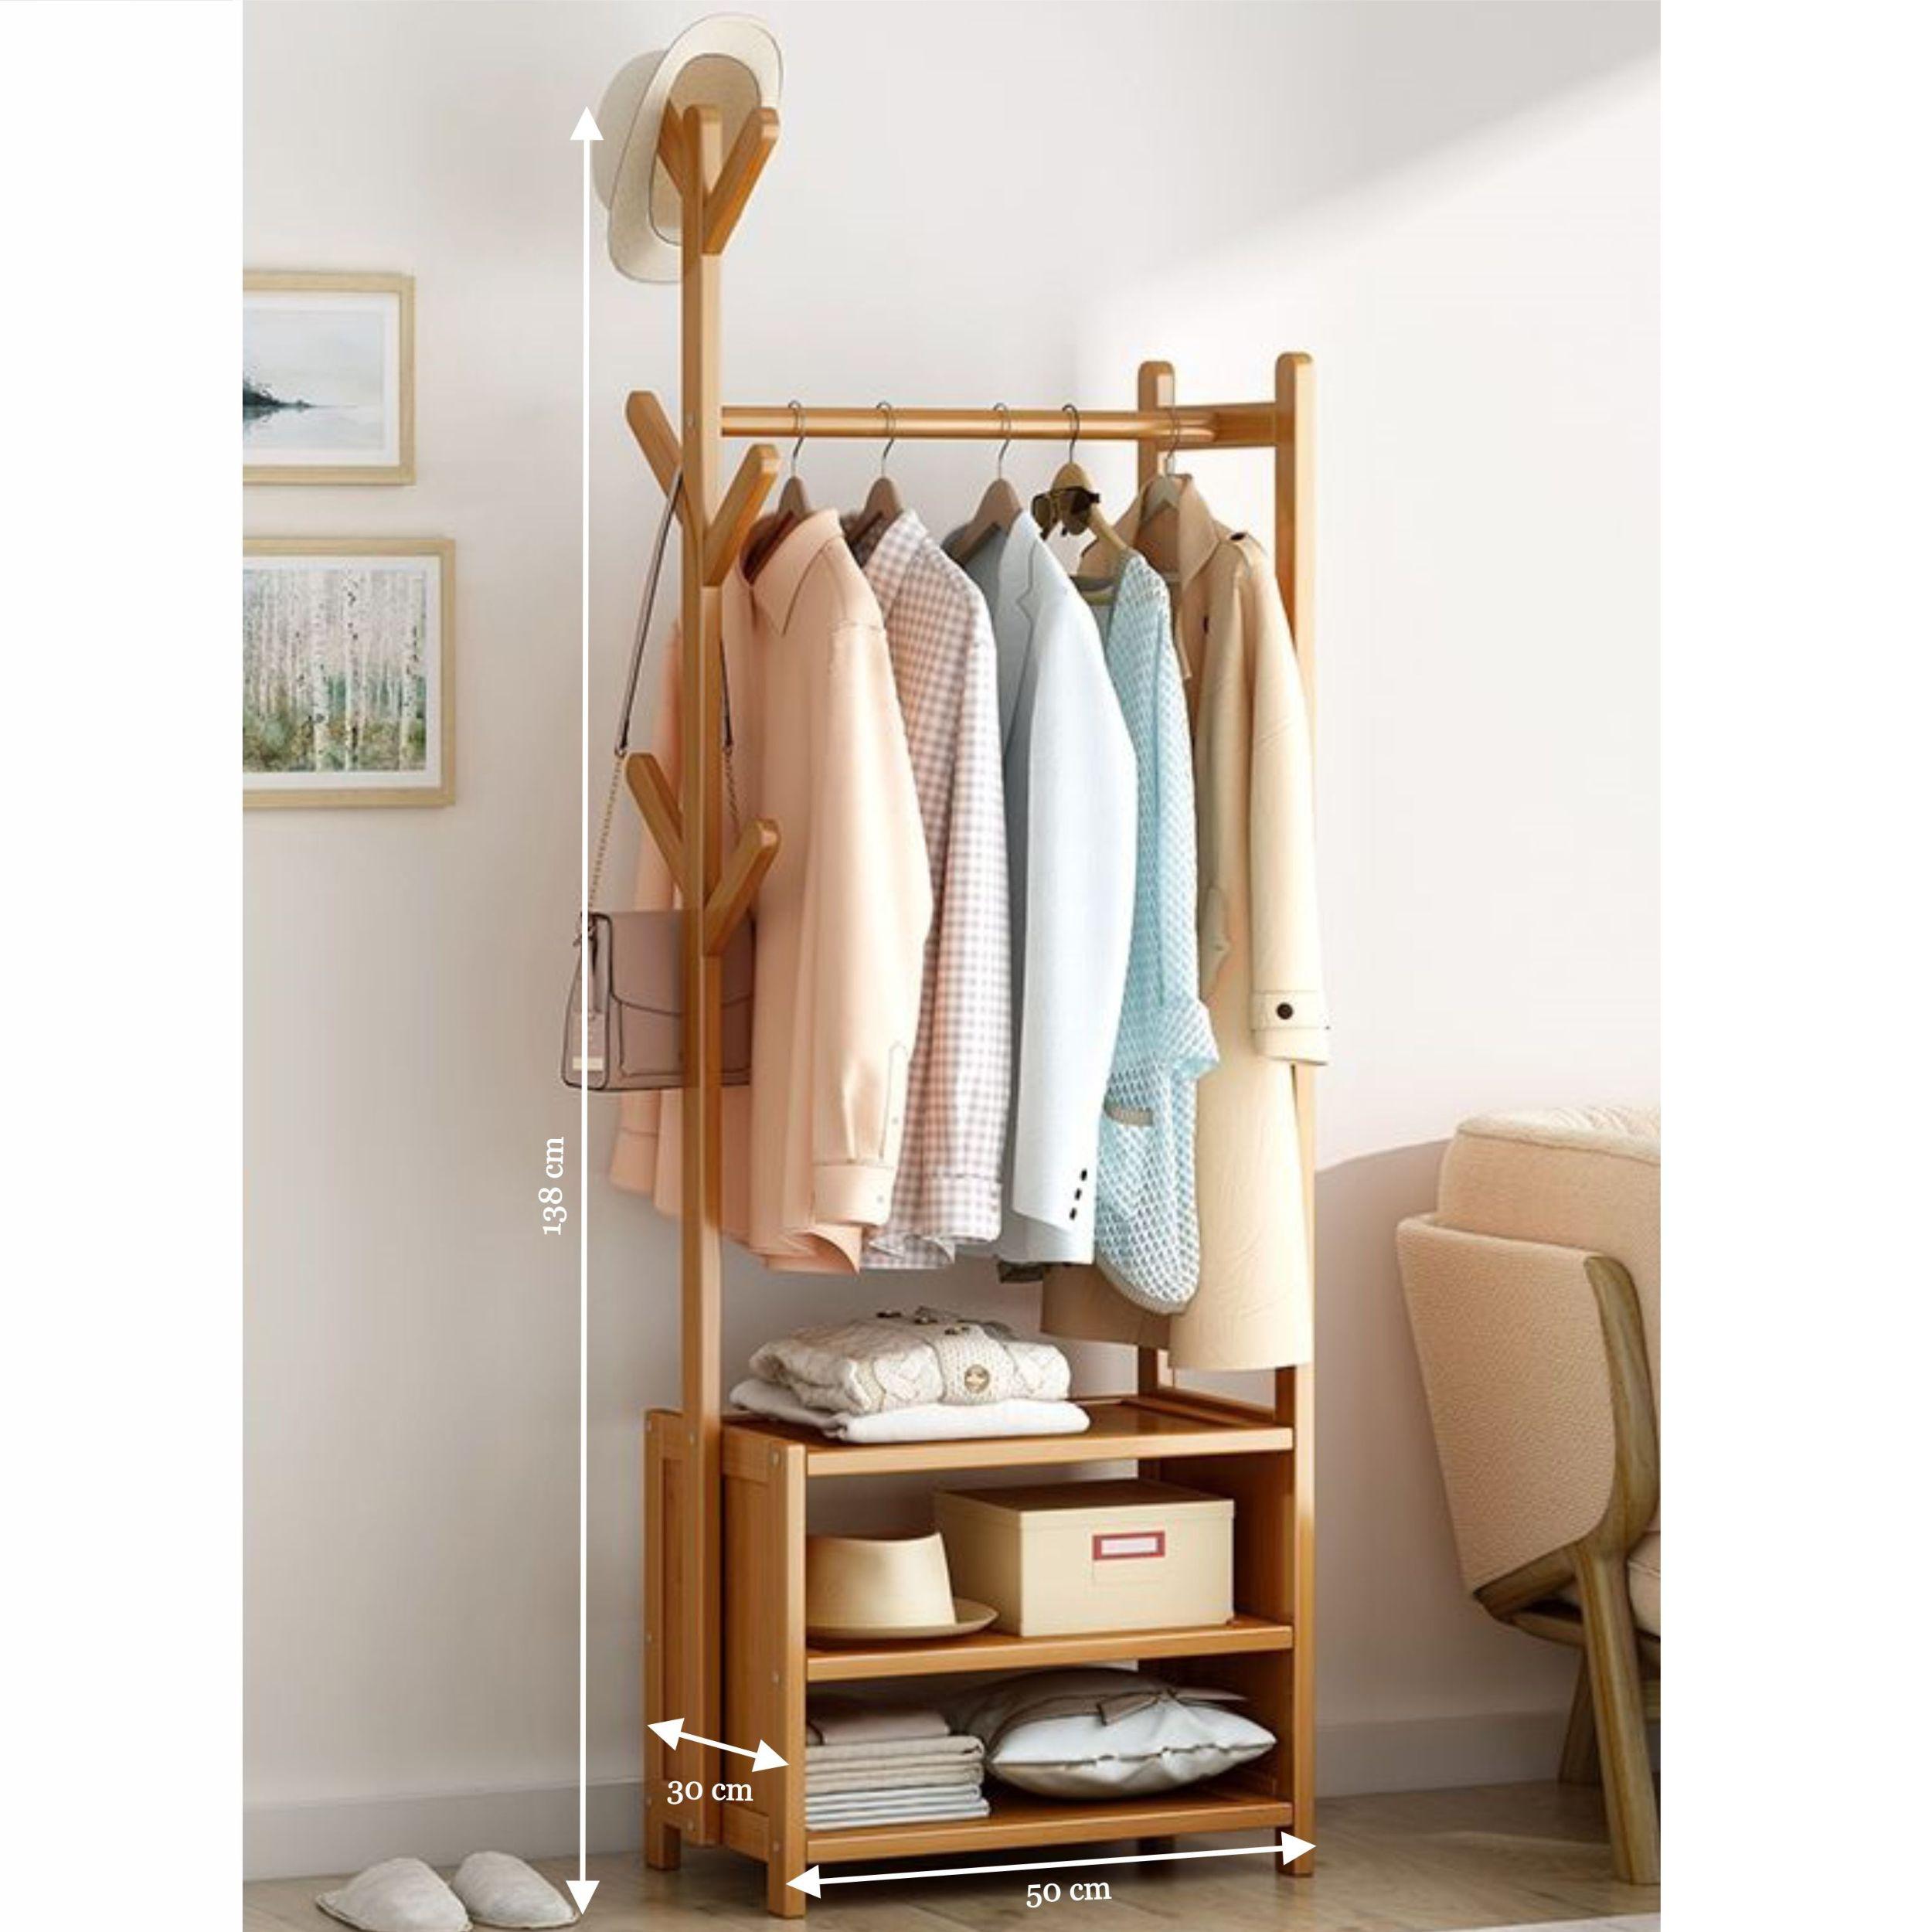 Bamboo clothes rack with tree-shaped accessory holder